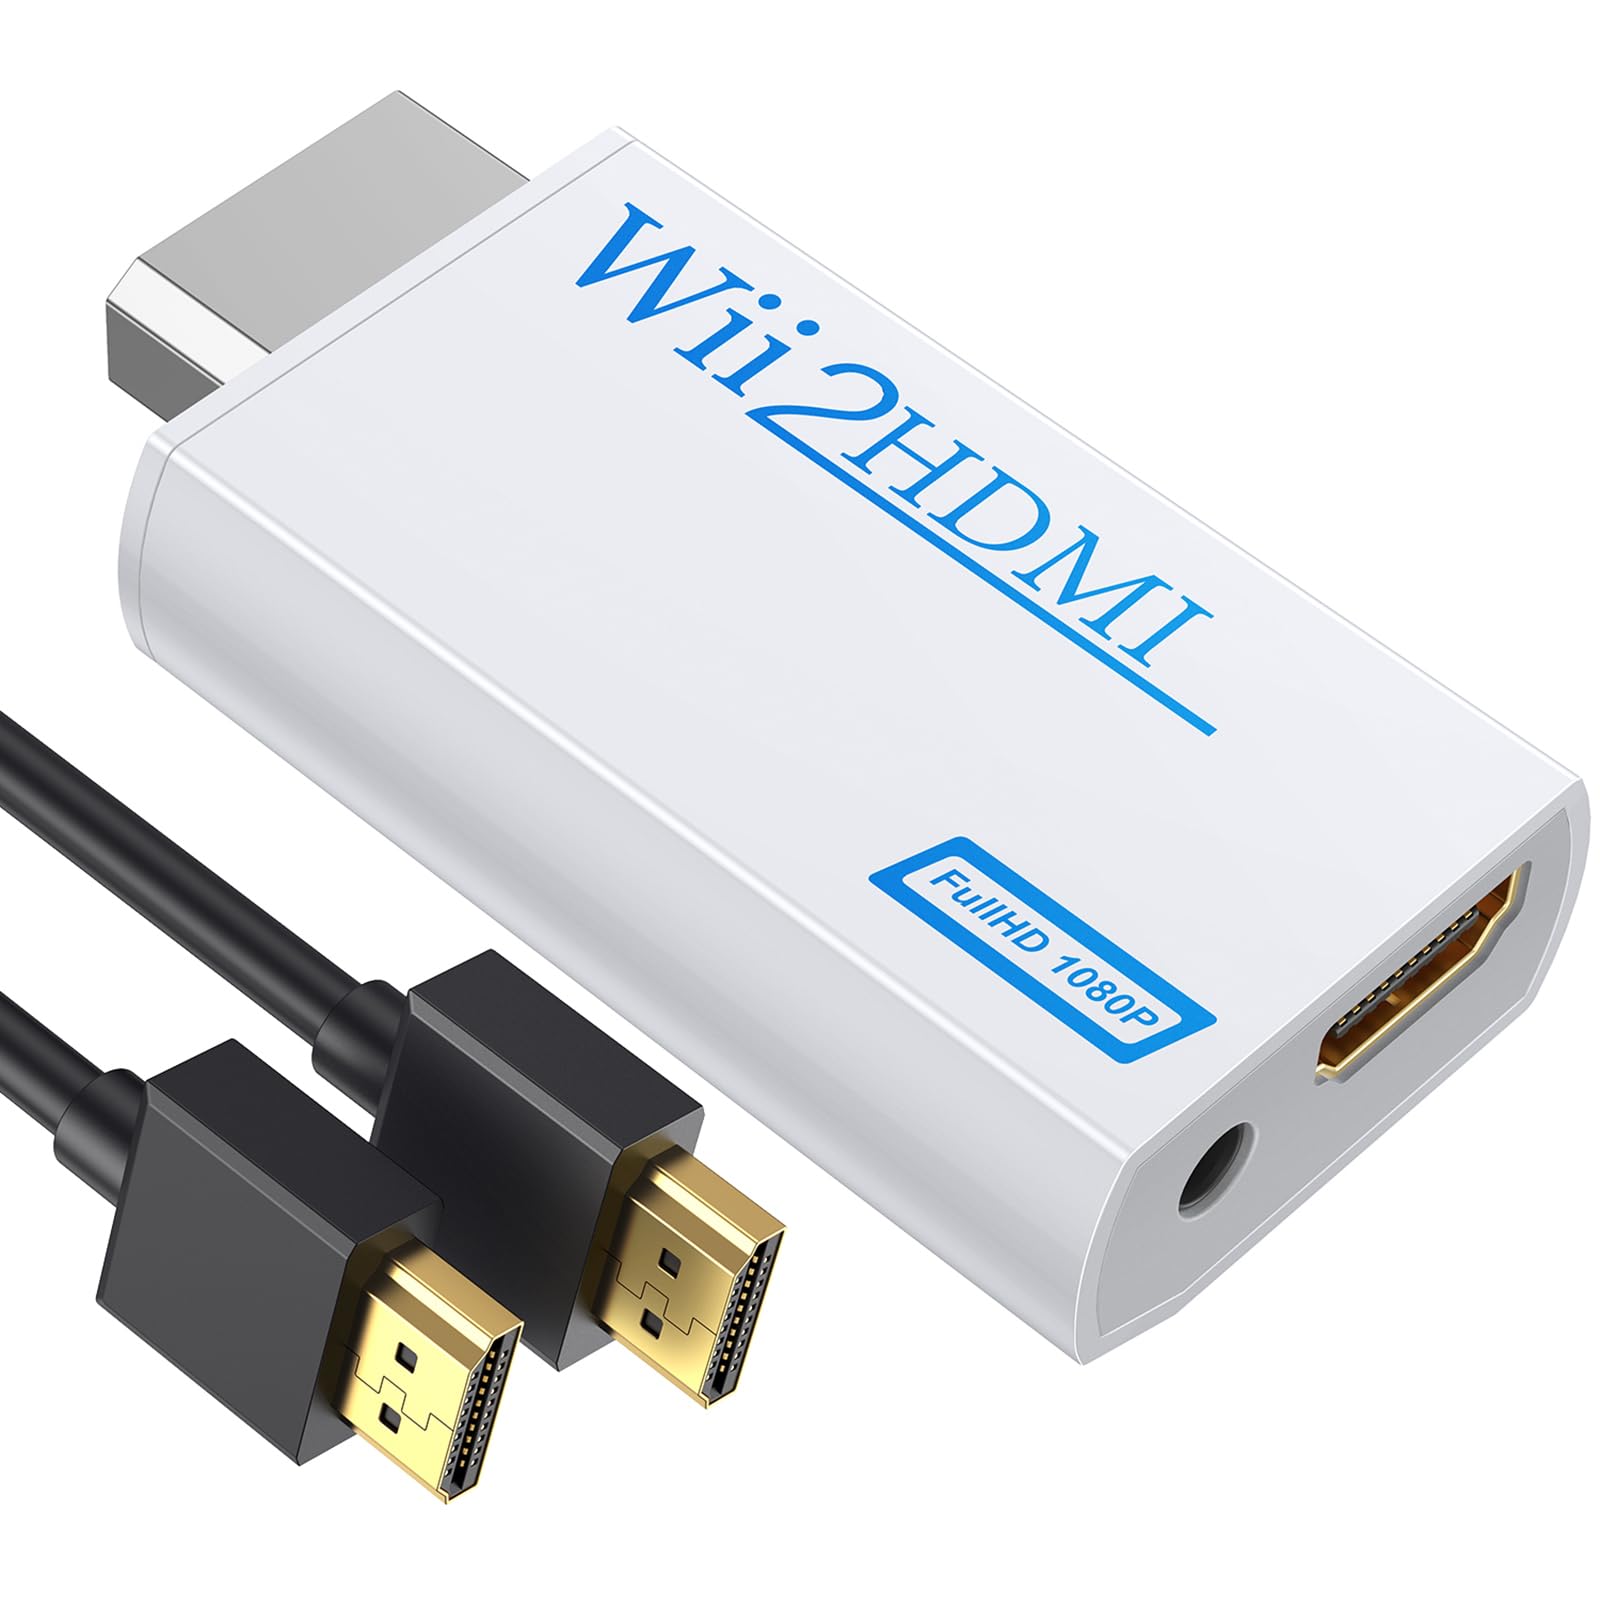 GANA Wii to HDMI Converter Adapter with Hdmi Cable Connect Wii Console to HDMI Display in 1080p Output Video with 3.5mm Audio Supports All Wii Display Modes White - amzGamess